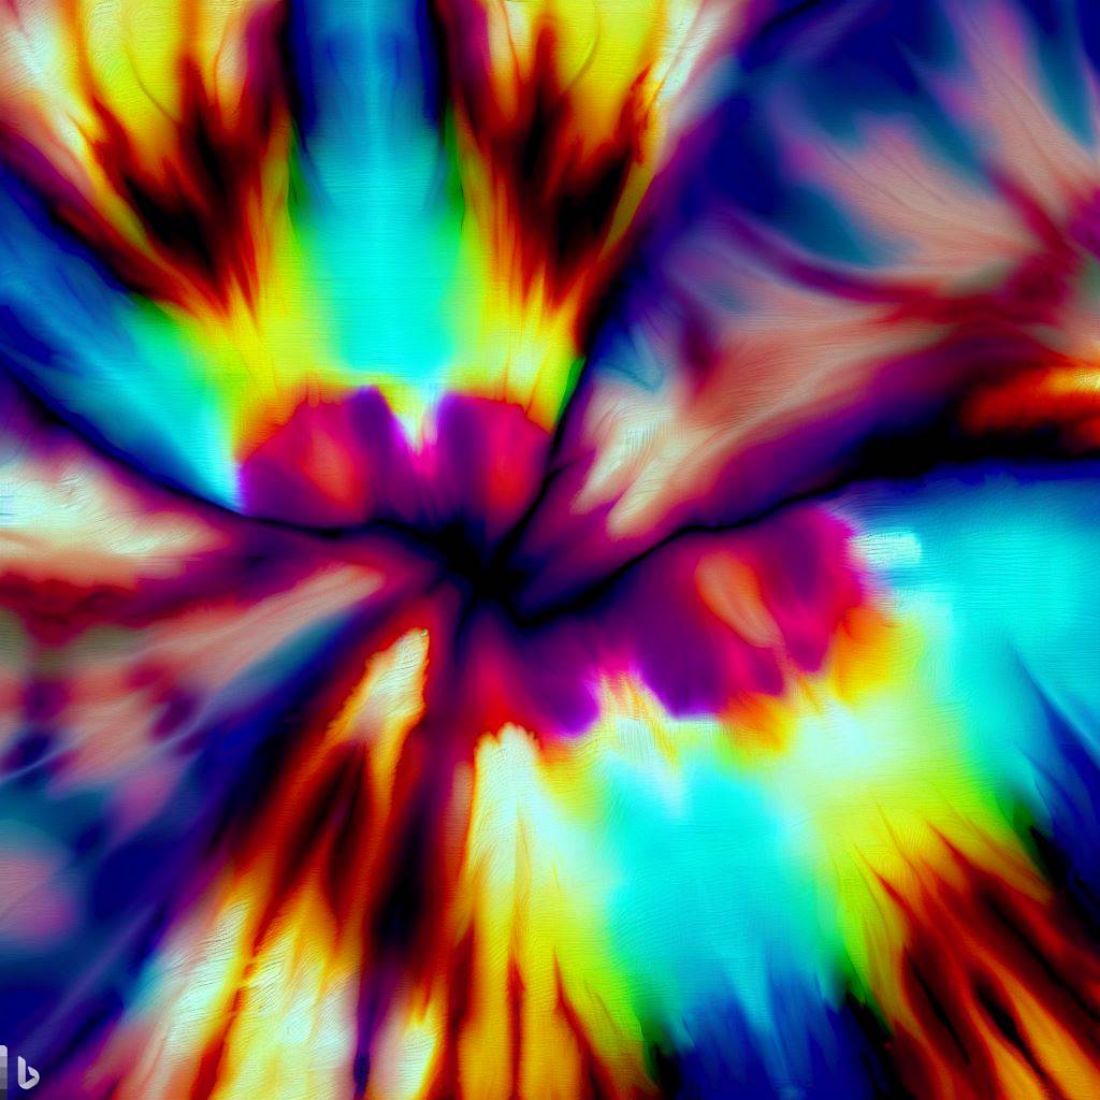 4 Tie dye psychedelic background images in varoius colour combinations preview image.